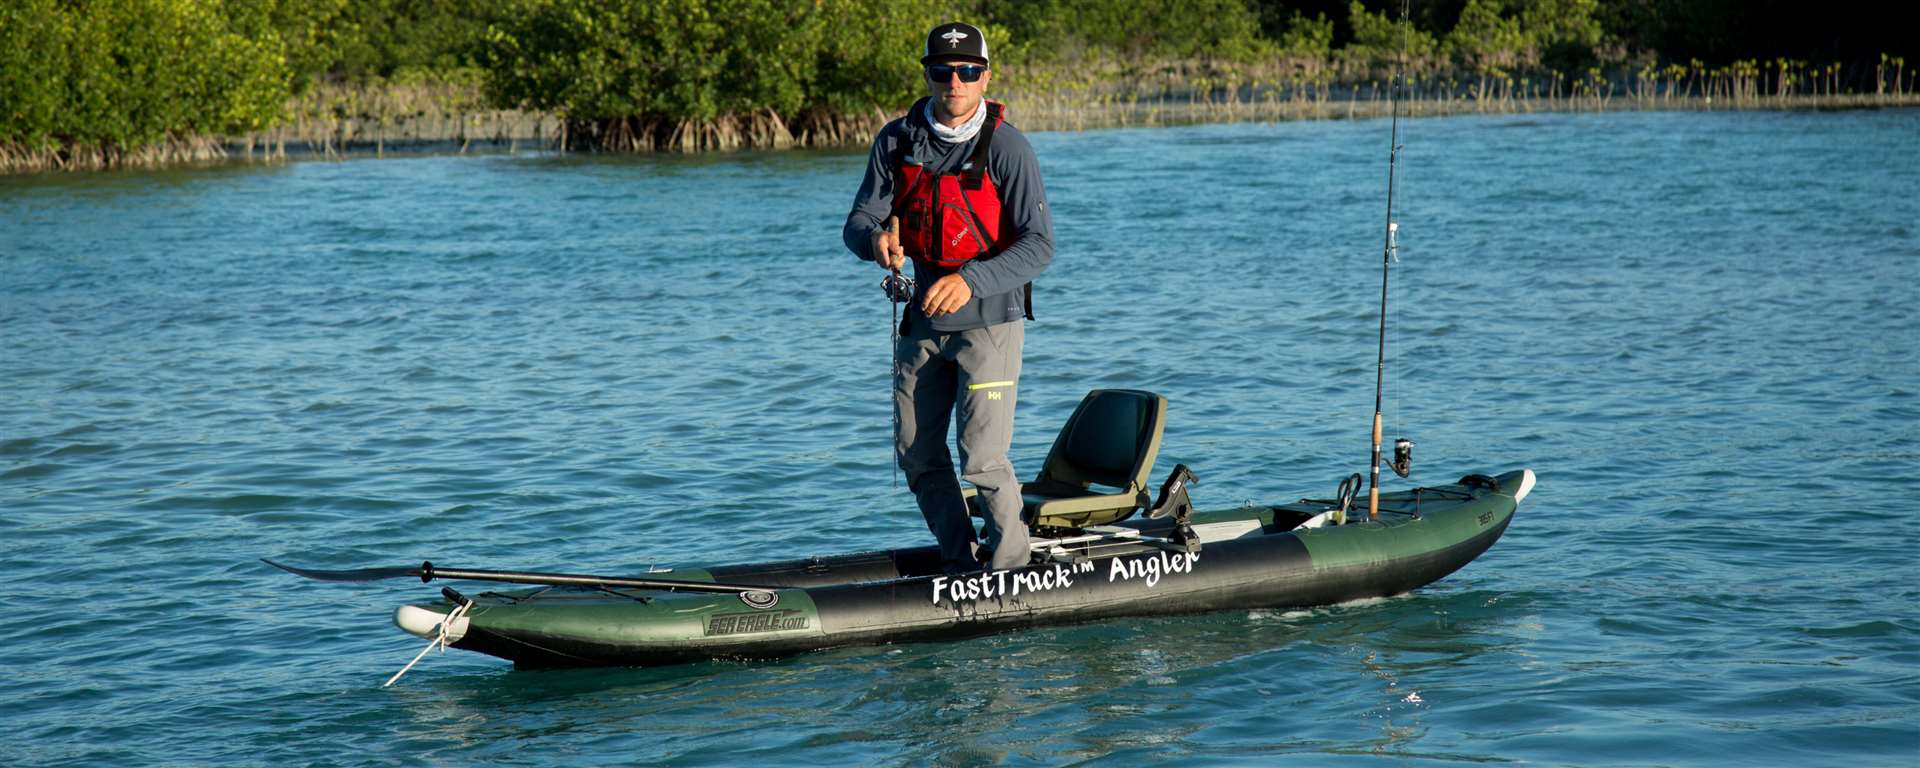 SeaEagle Inflatable Kayak Sea Eagle - 385FTA 3 Person 12'6" Green FastTrack Angler Inflatable Angler Pro Fishing Boat Package ( 385FTAK_P )